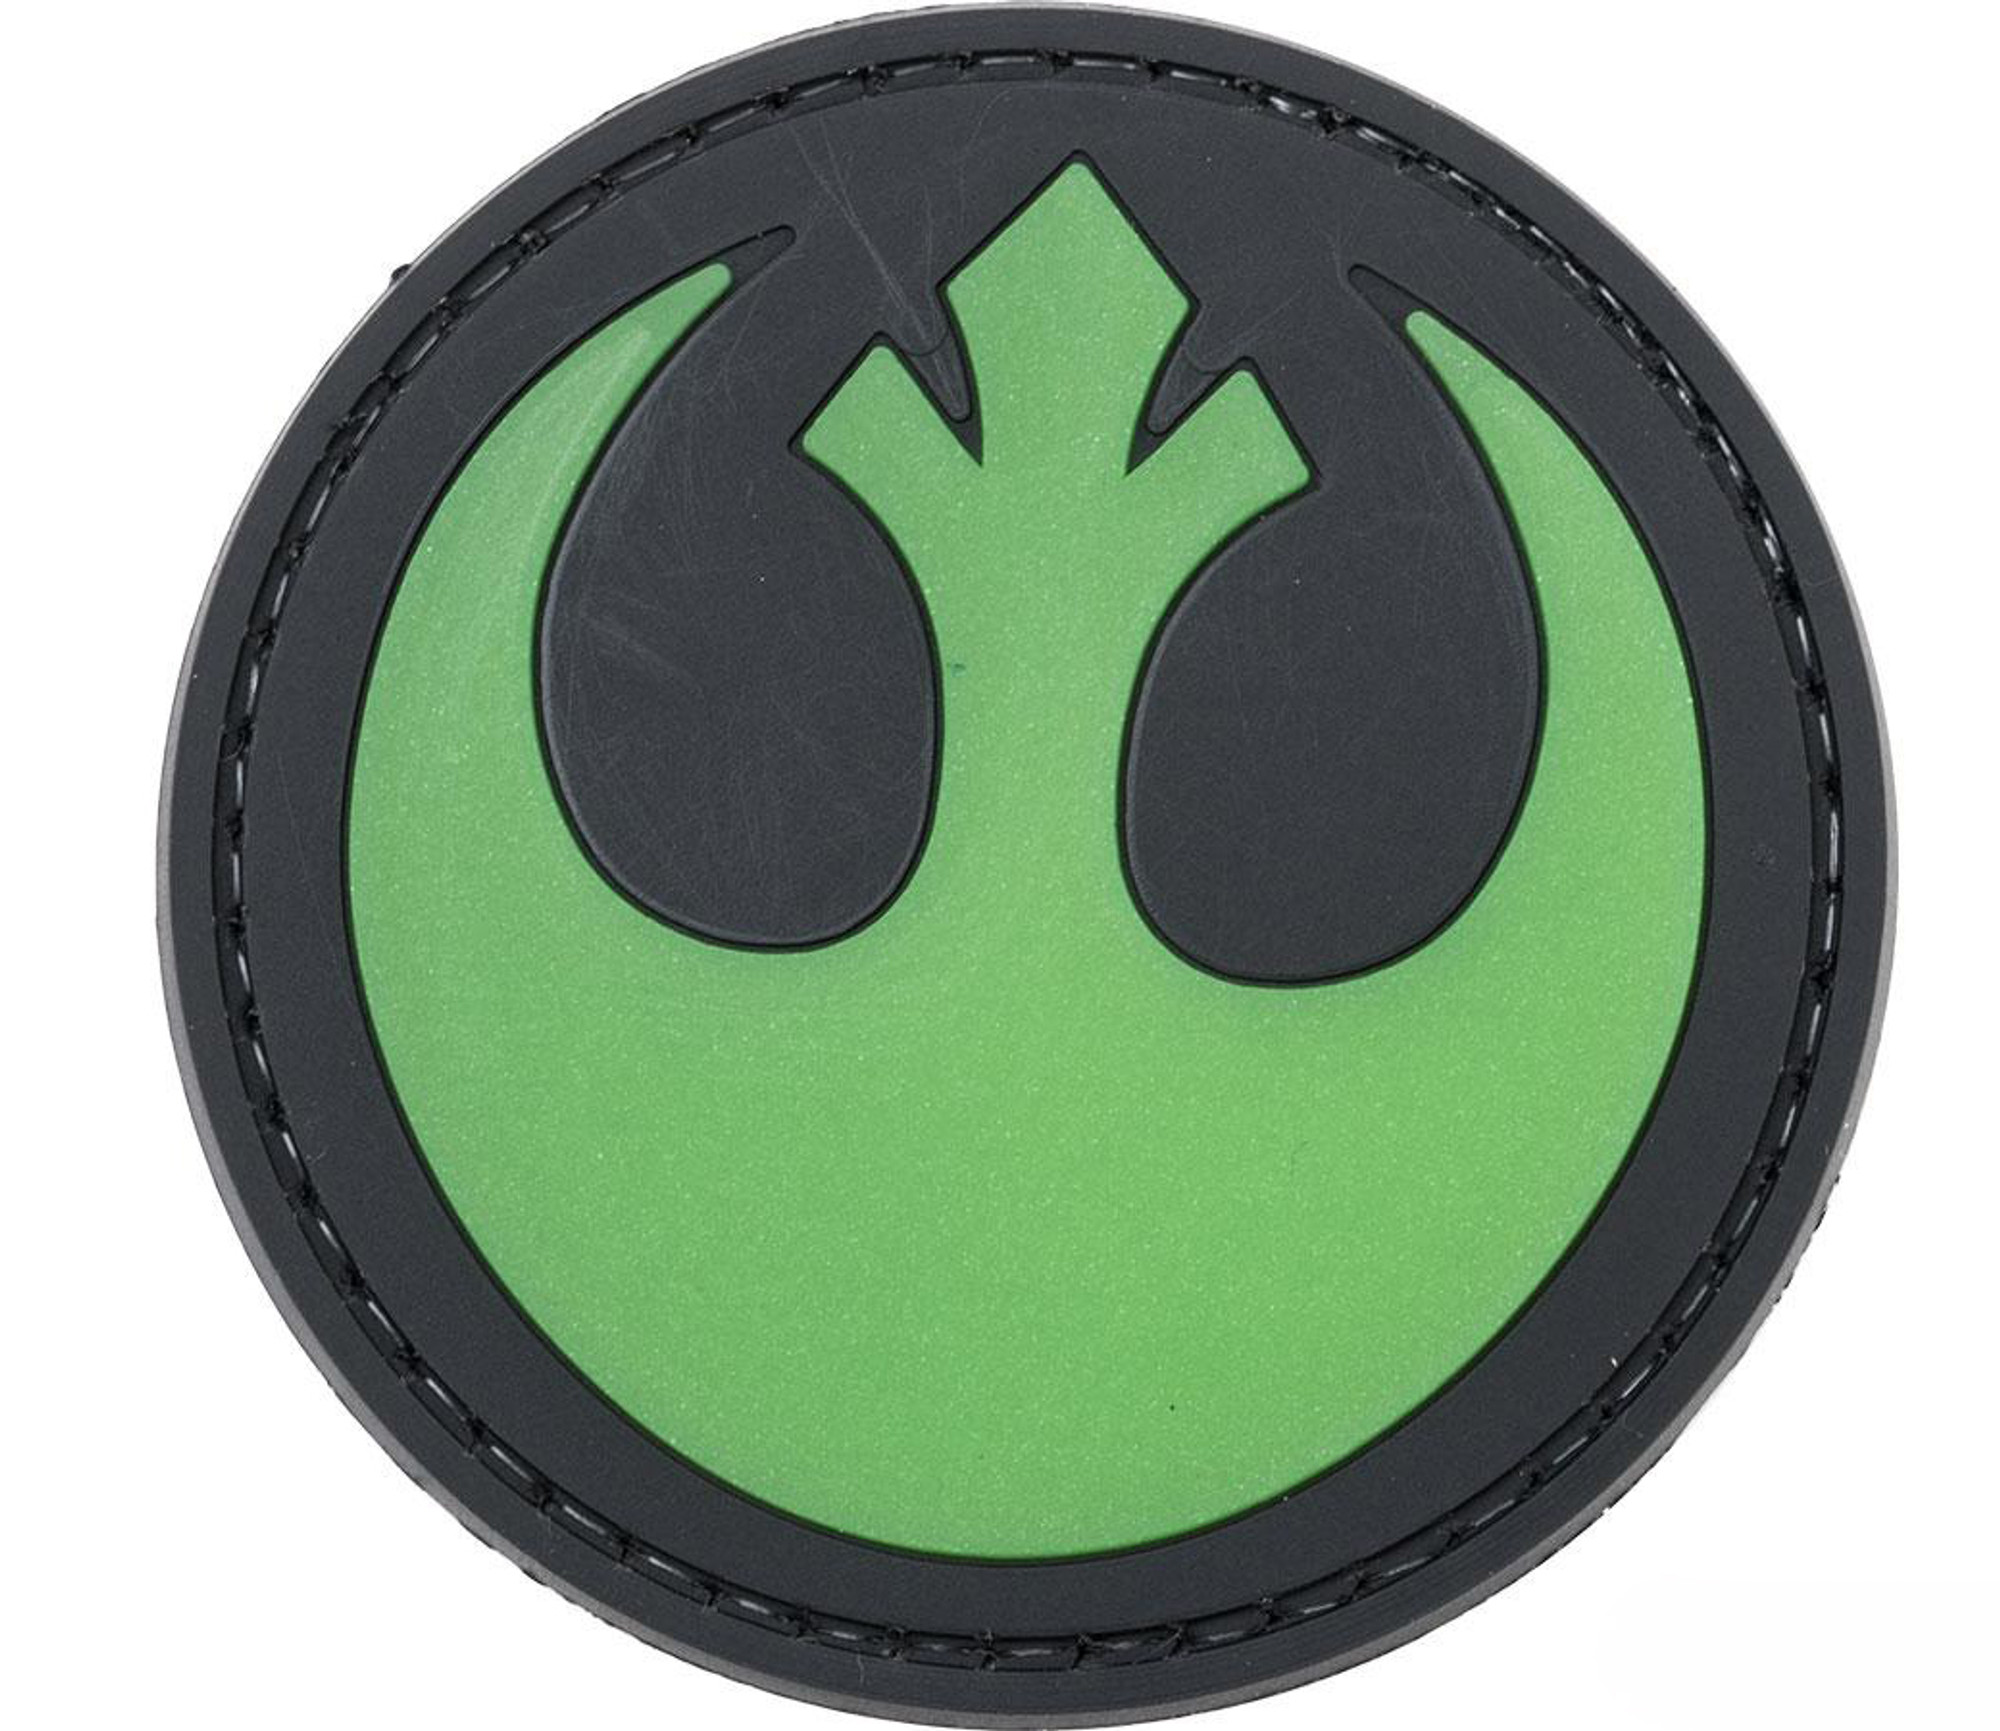 PVC Morale IFF Hook & Loop "Resistance Coalition" Patch (Color: Green)